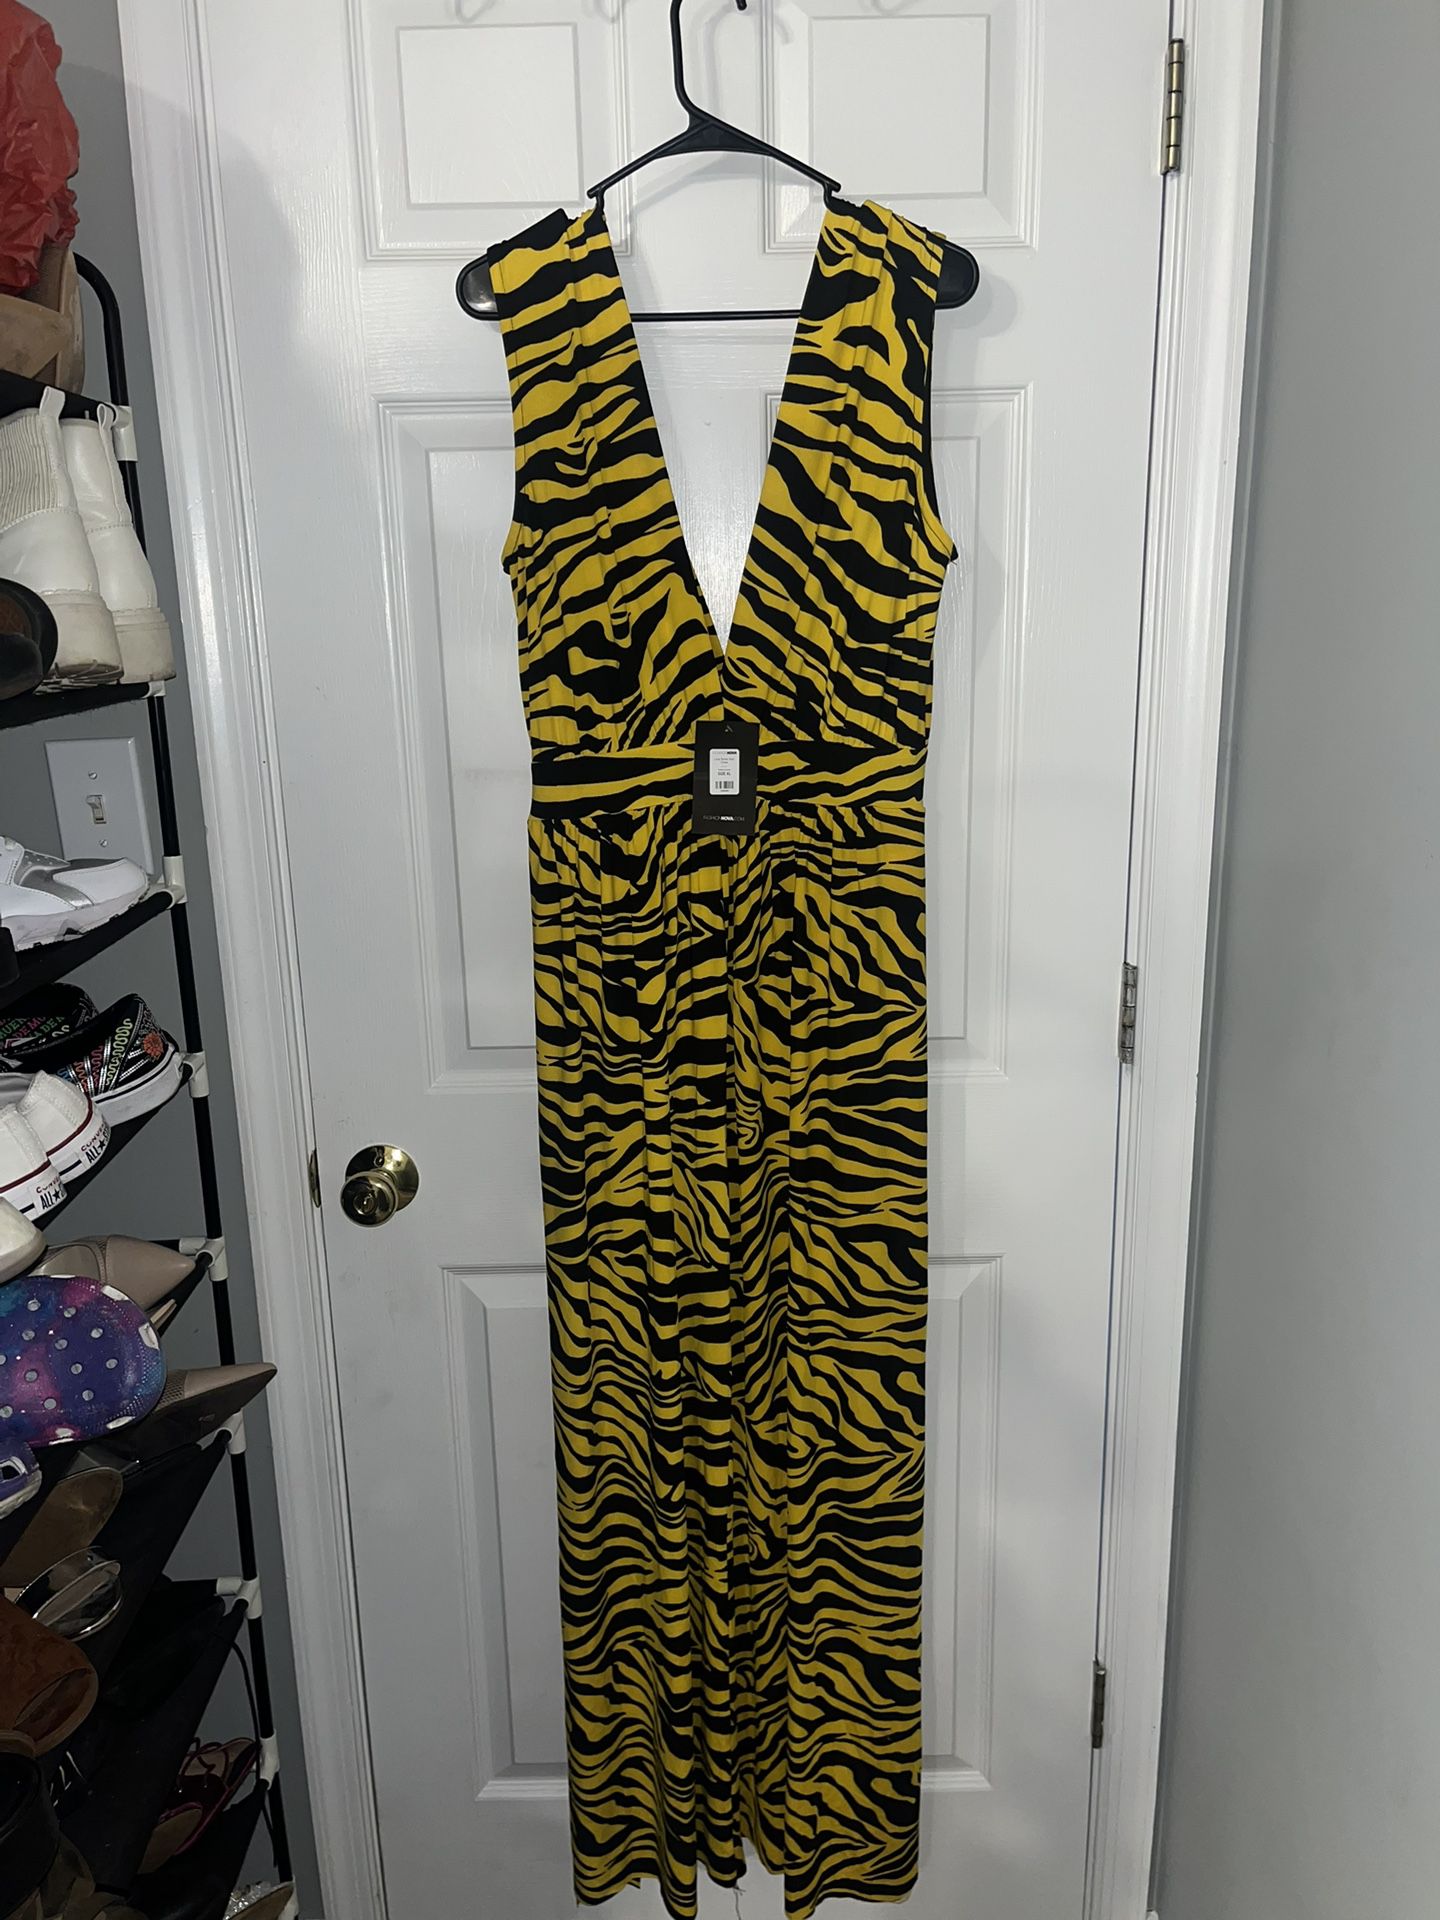 Plus size clothing For Sale-Cheap-New And Barely Worn